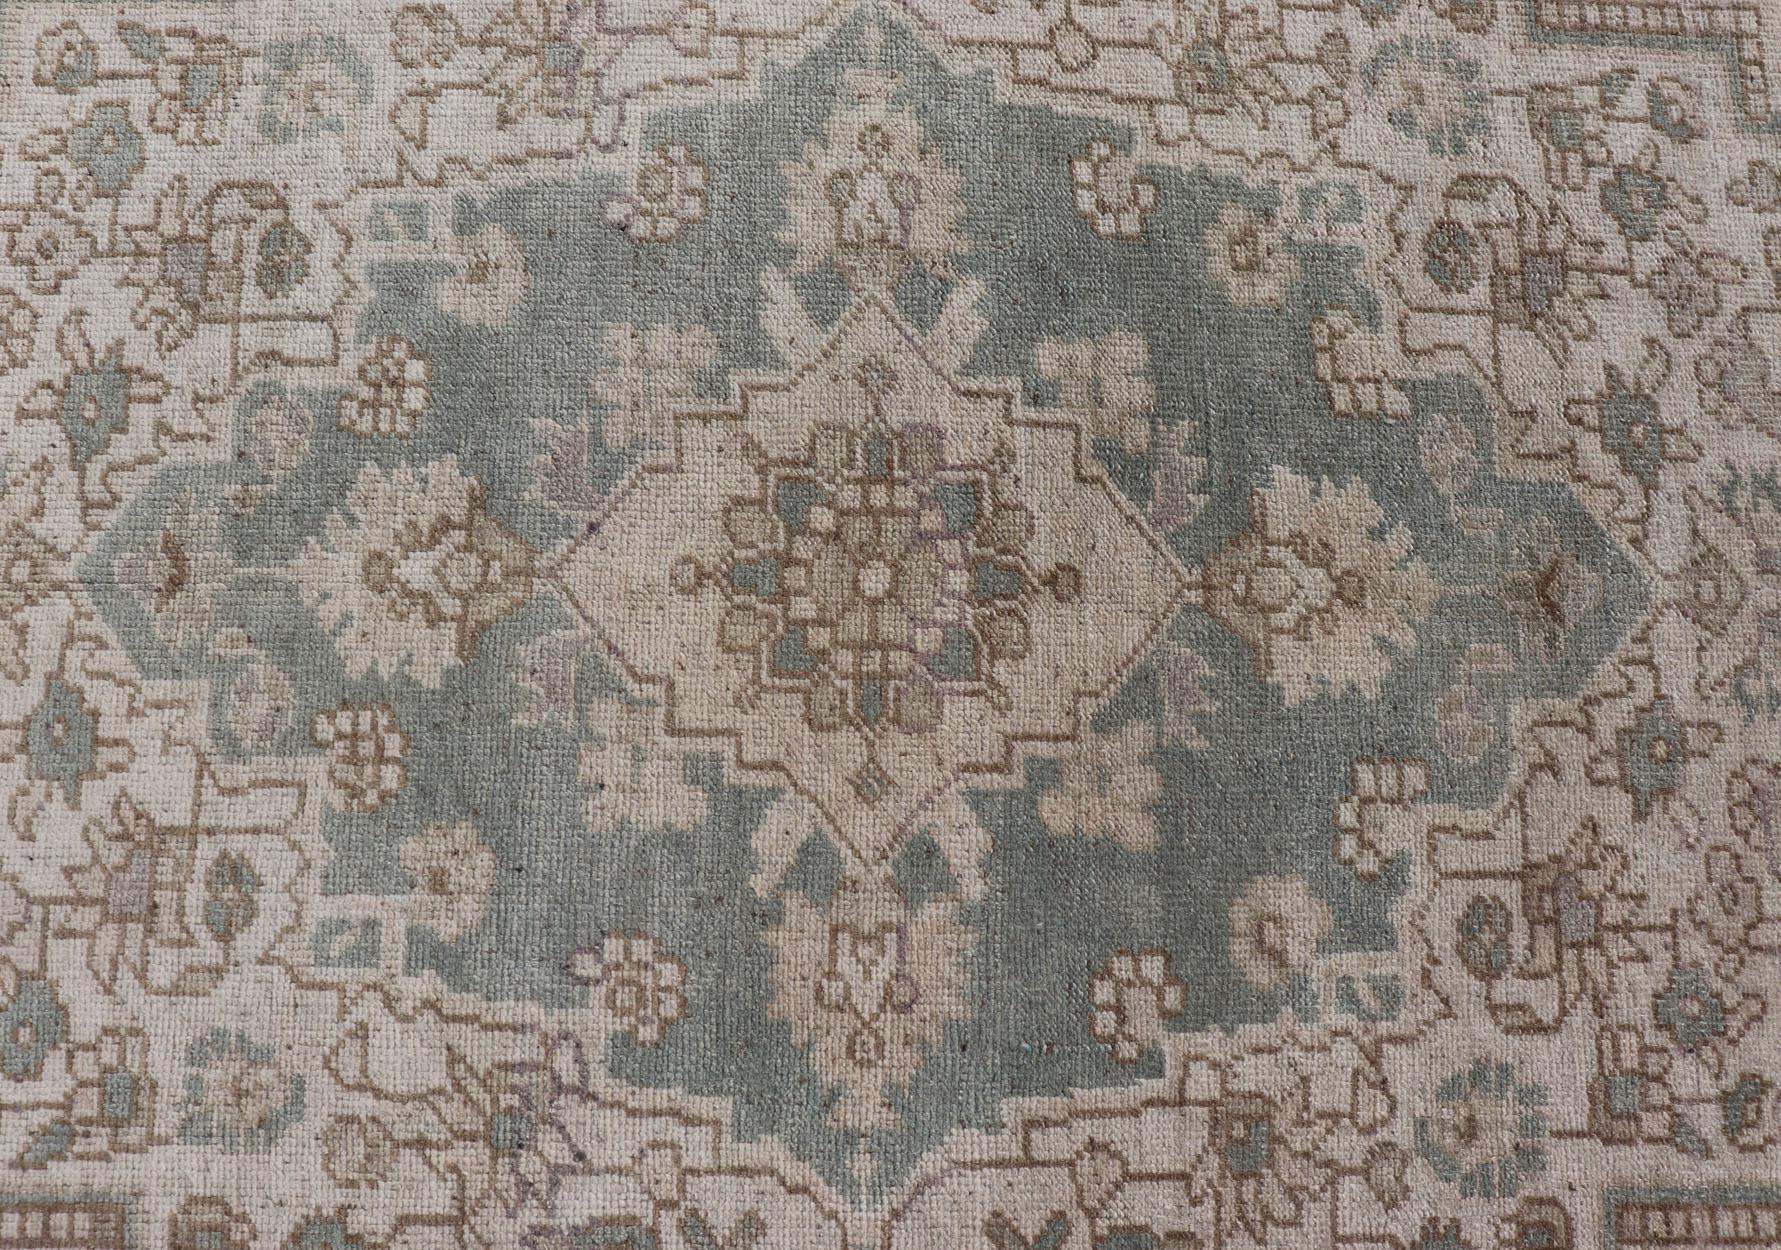 Turkish Oushak Vintage Medallion Rug in Light Blue-Green, Tan, Taupe, and Cream For Sale 7